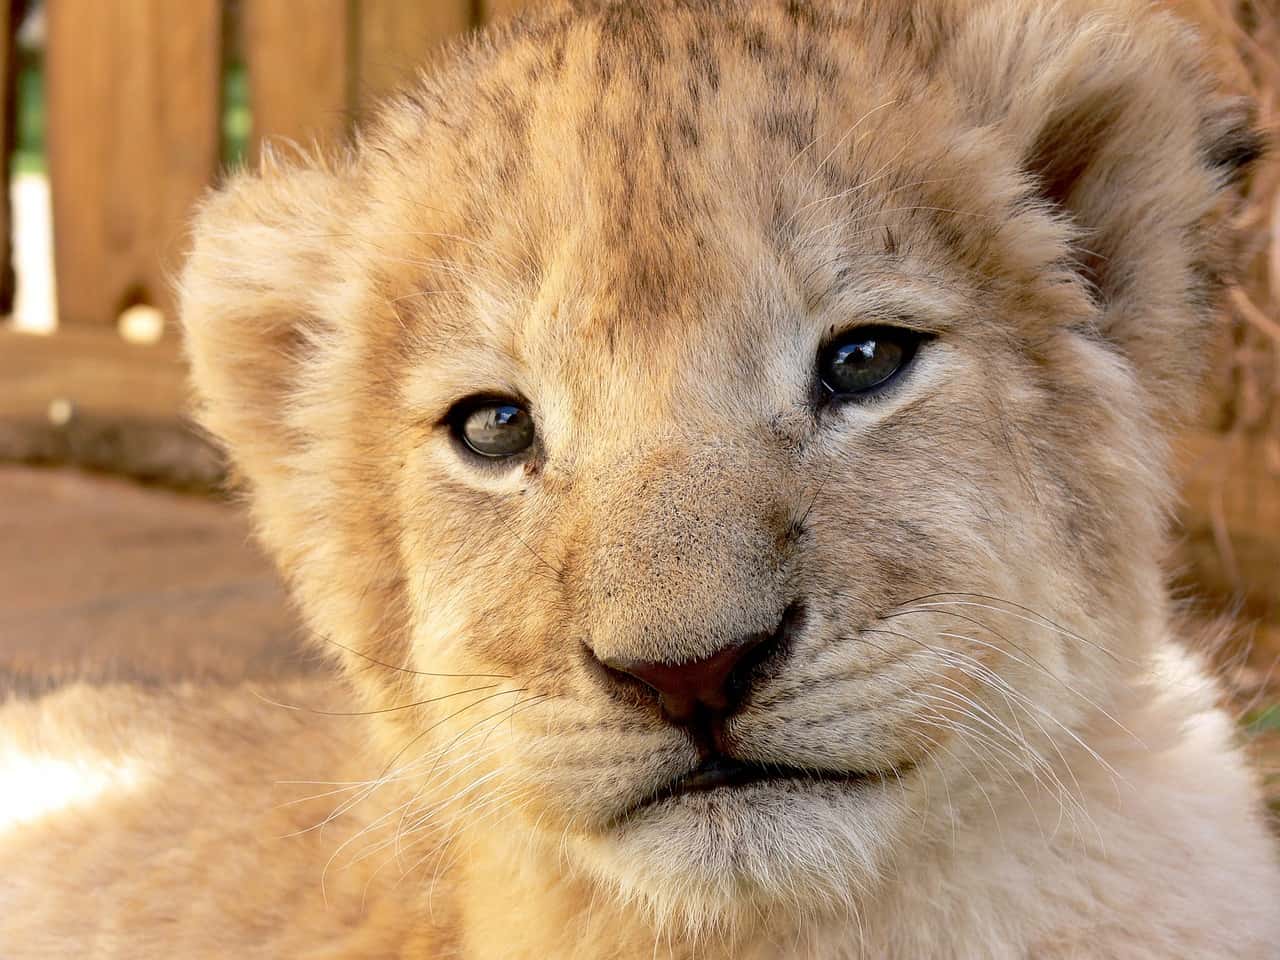 The New Simba From The Lion King is Based on a Dallas Zoo Cub